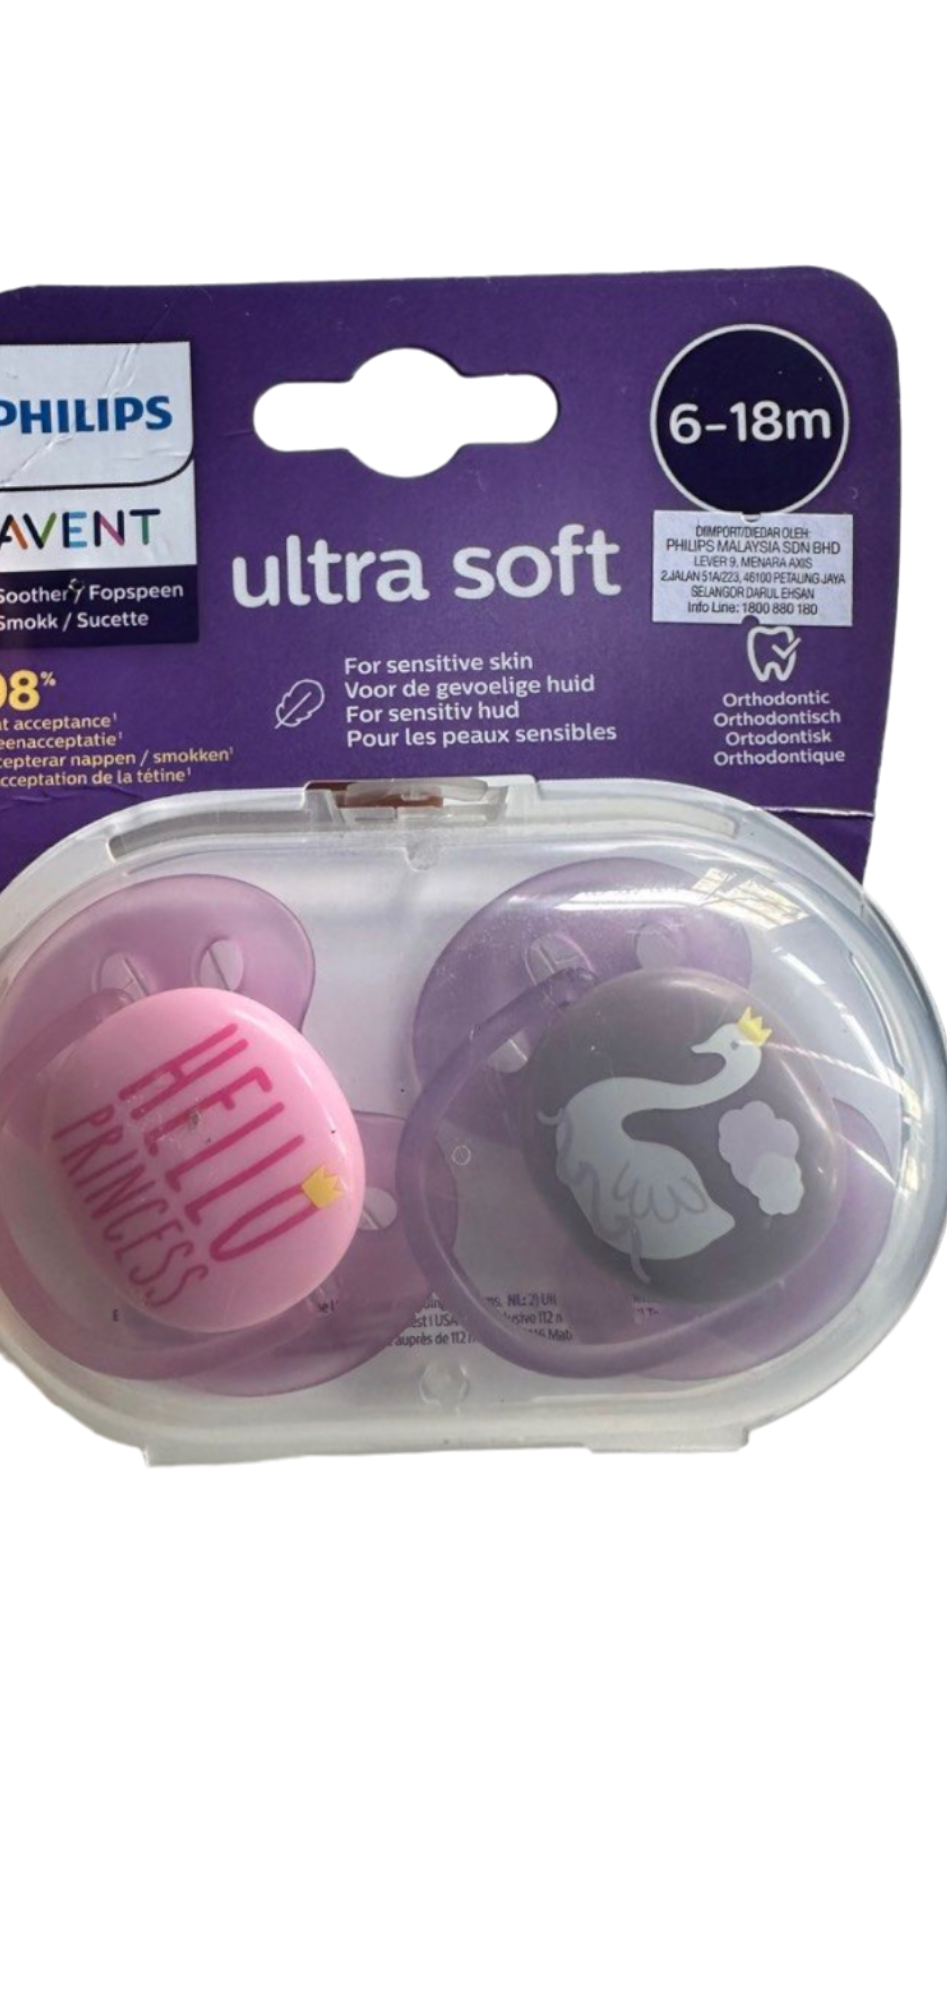 EVENT PHILIPS ULTRA SOFT GIRL 6-18M